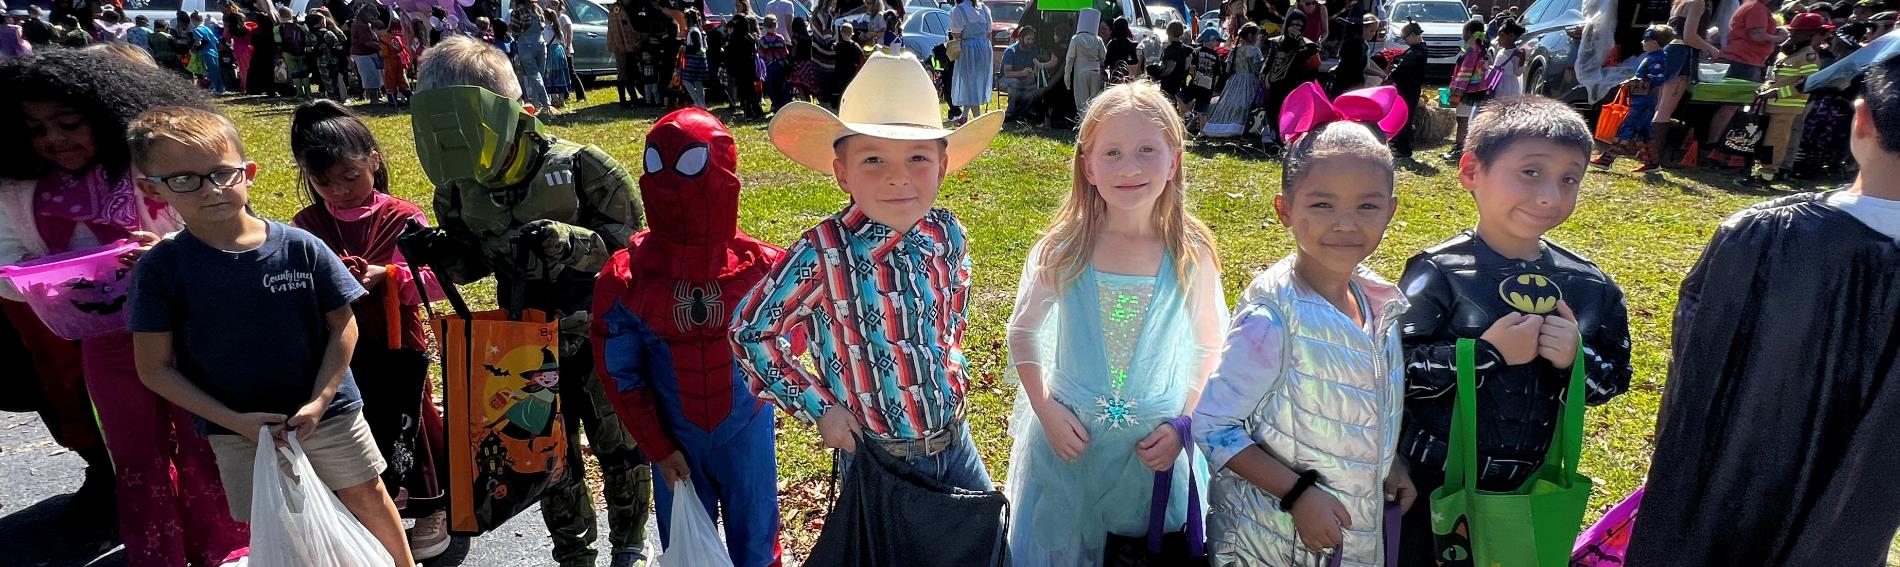 Elementary School Students in Costumes